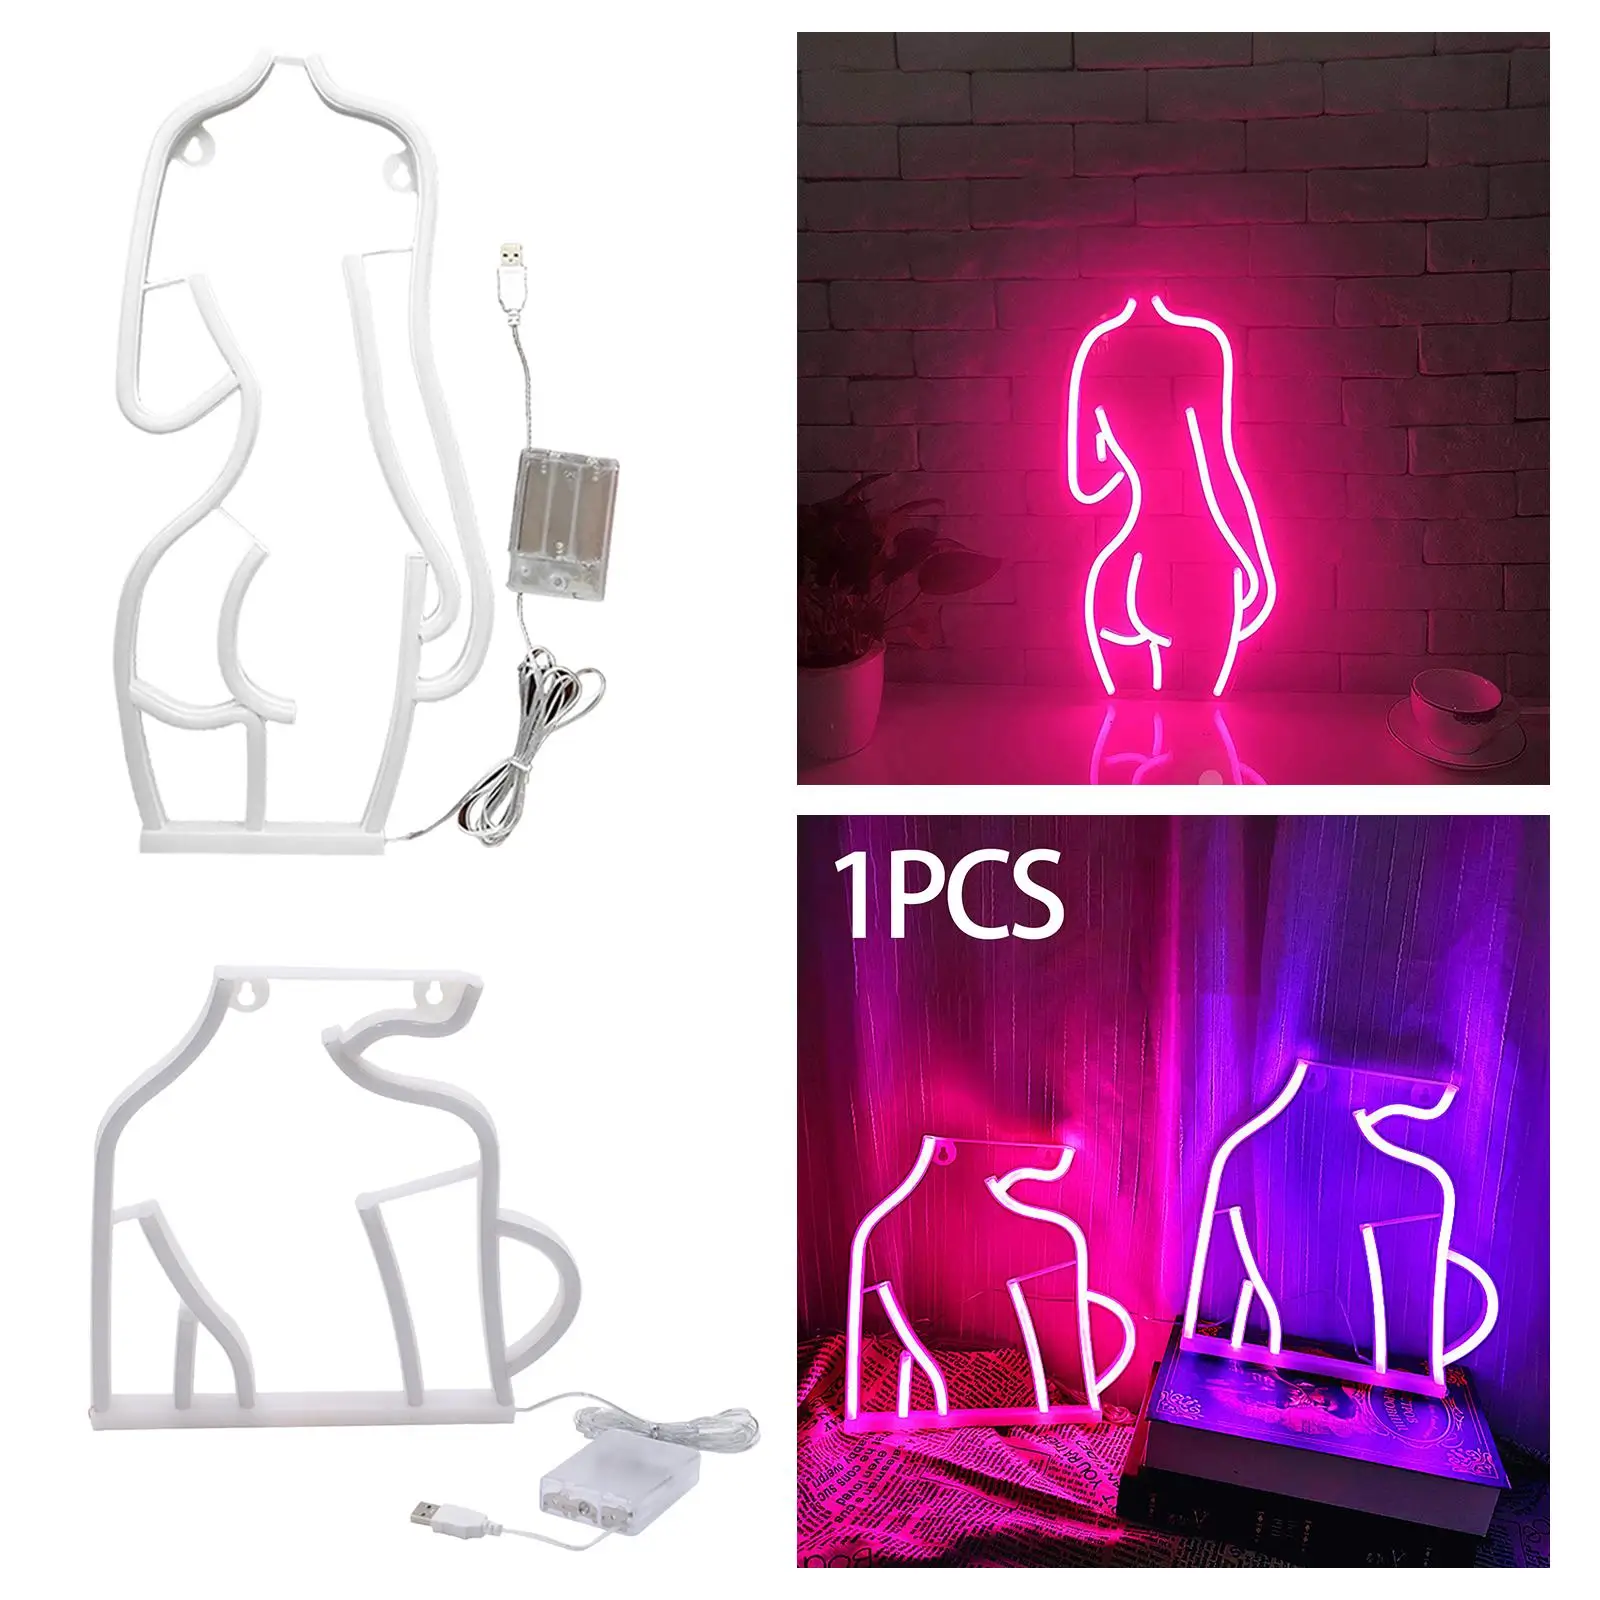 Lady Neon Signs USB Connected Lamp Decorative LED Night Lights Wall Art for Room Dance Studio Party Restaurant Garage